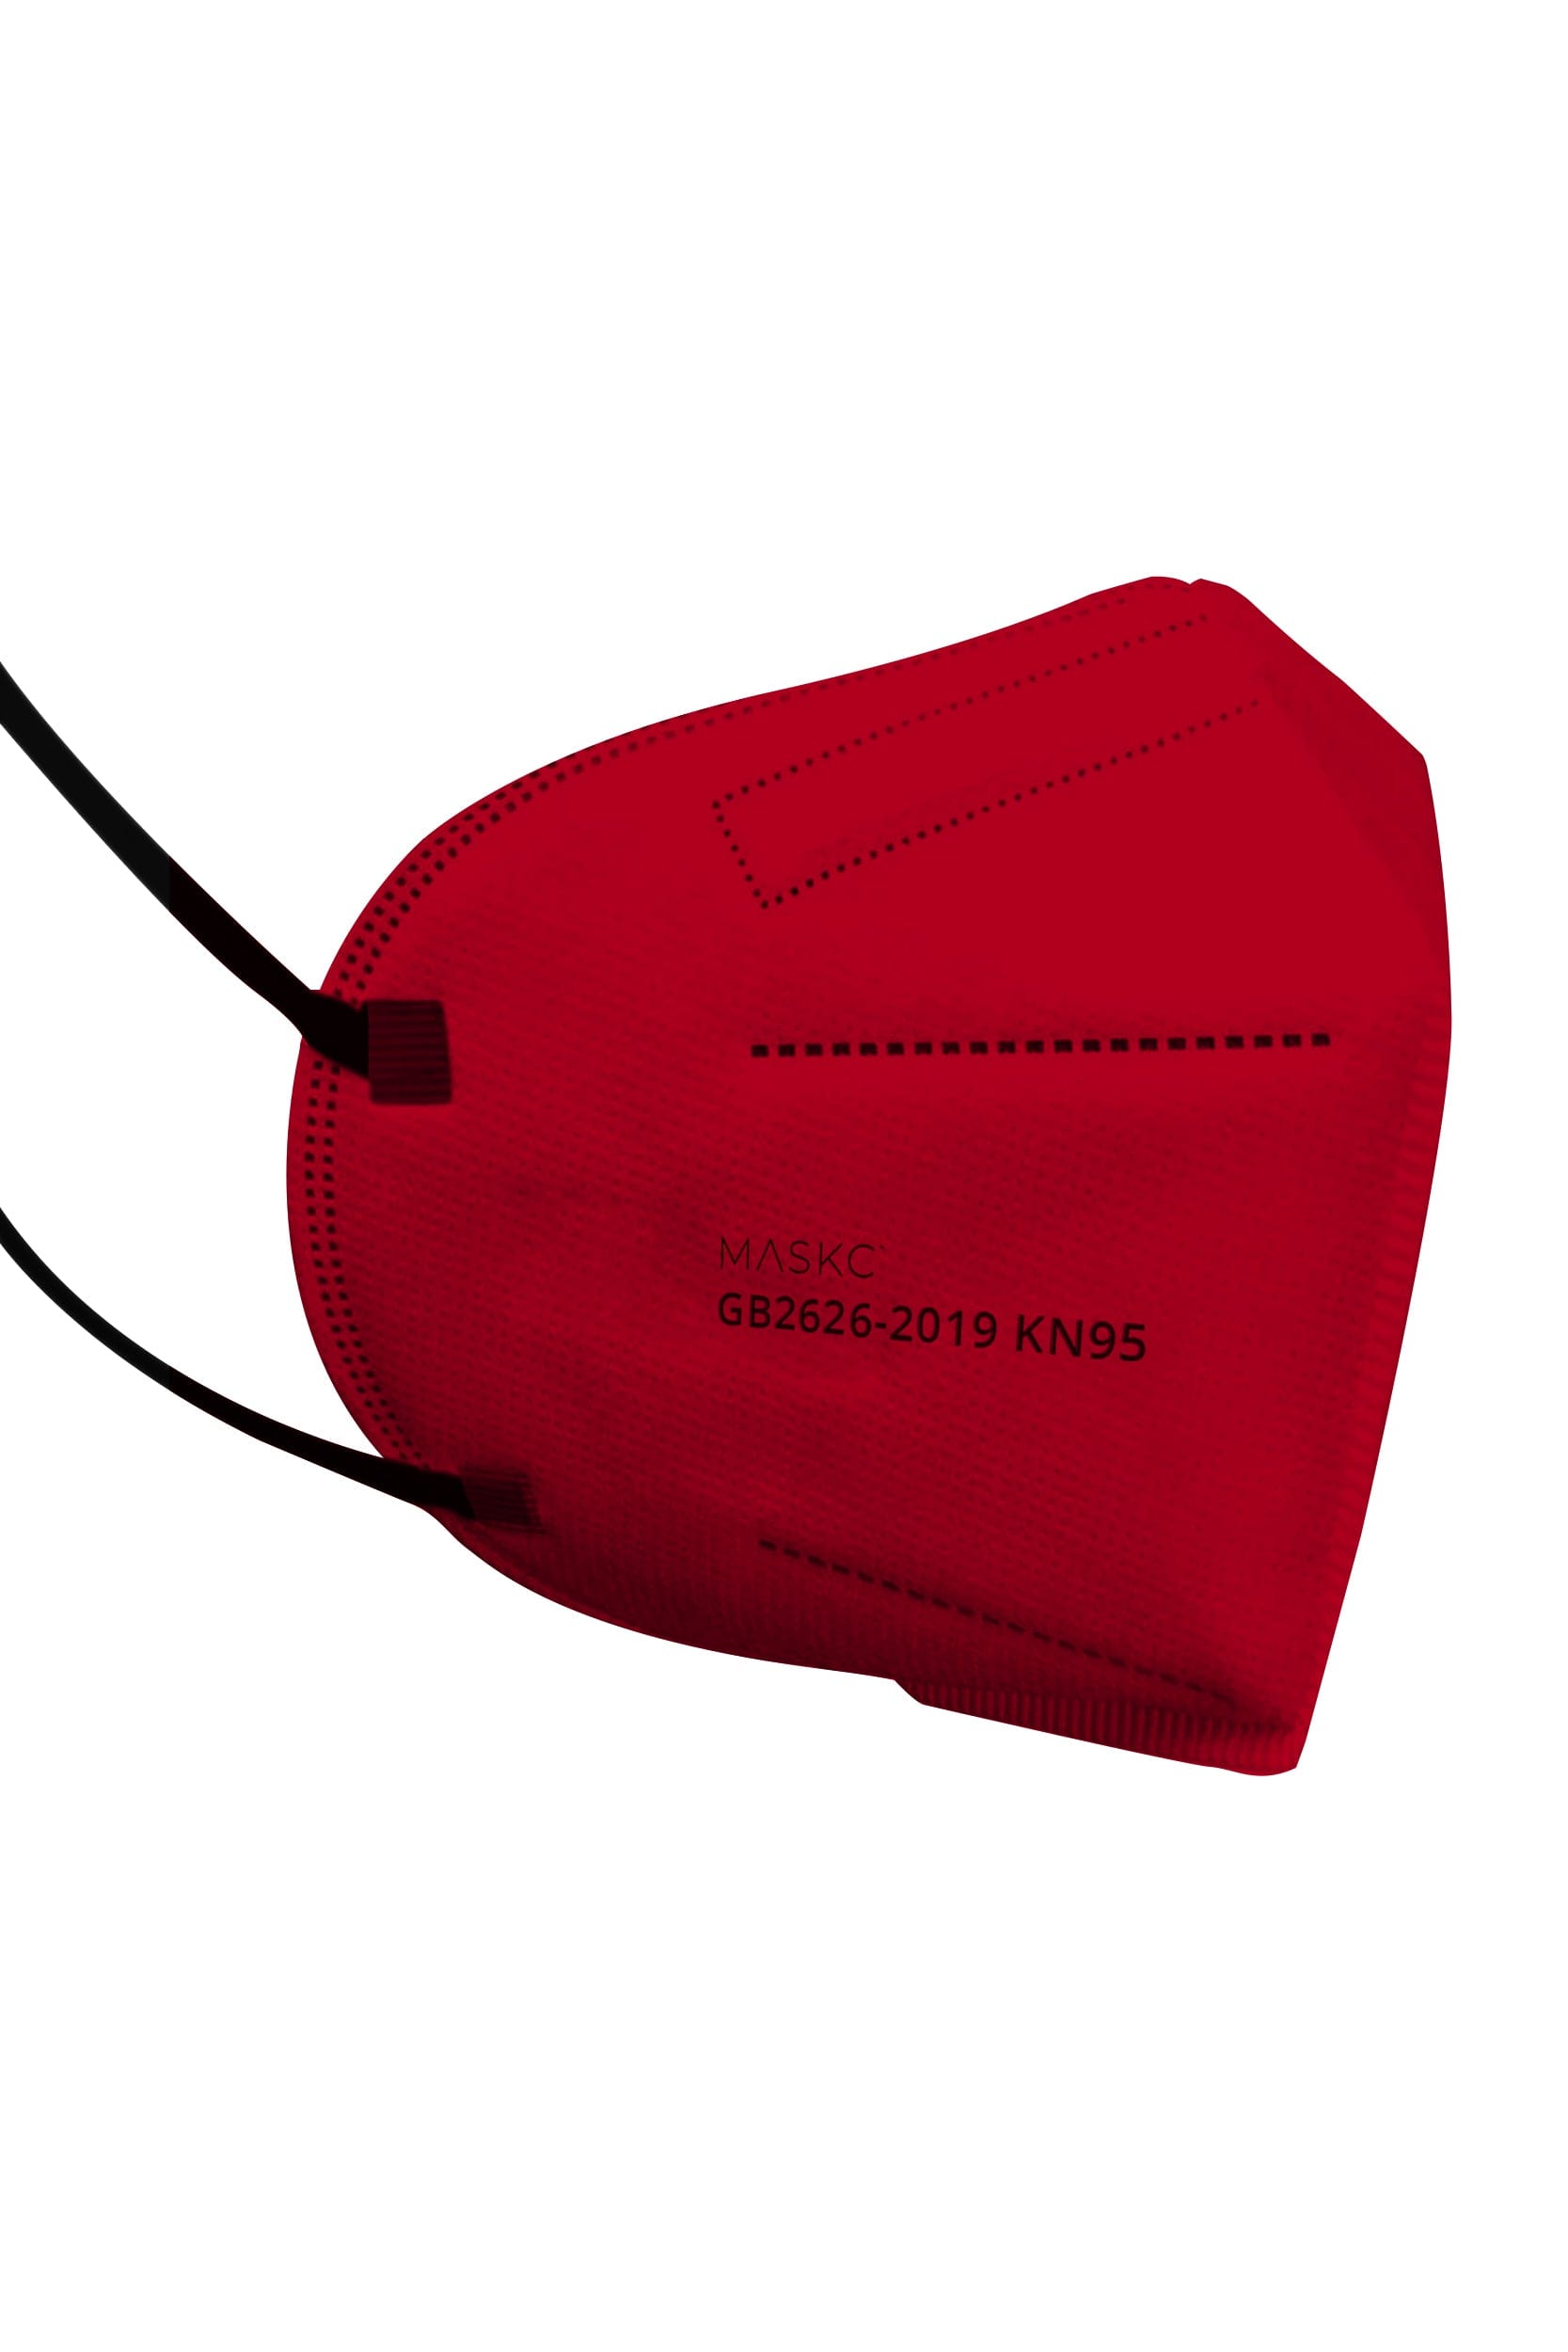 Stylish Bright Red KN95 face mask, with soft black ear loops and high quality fabric. 